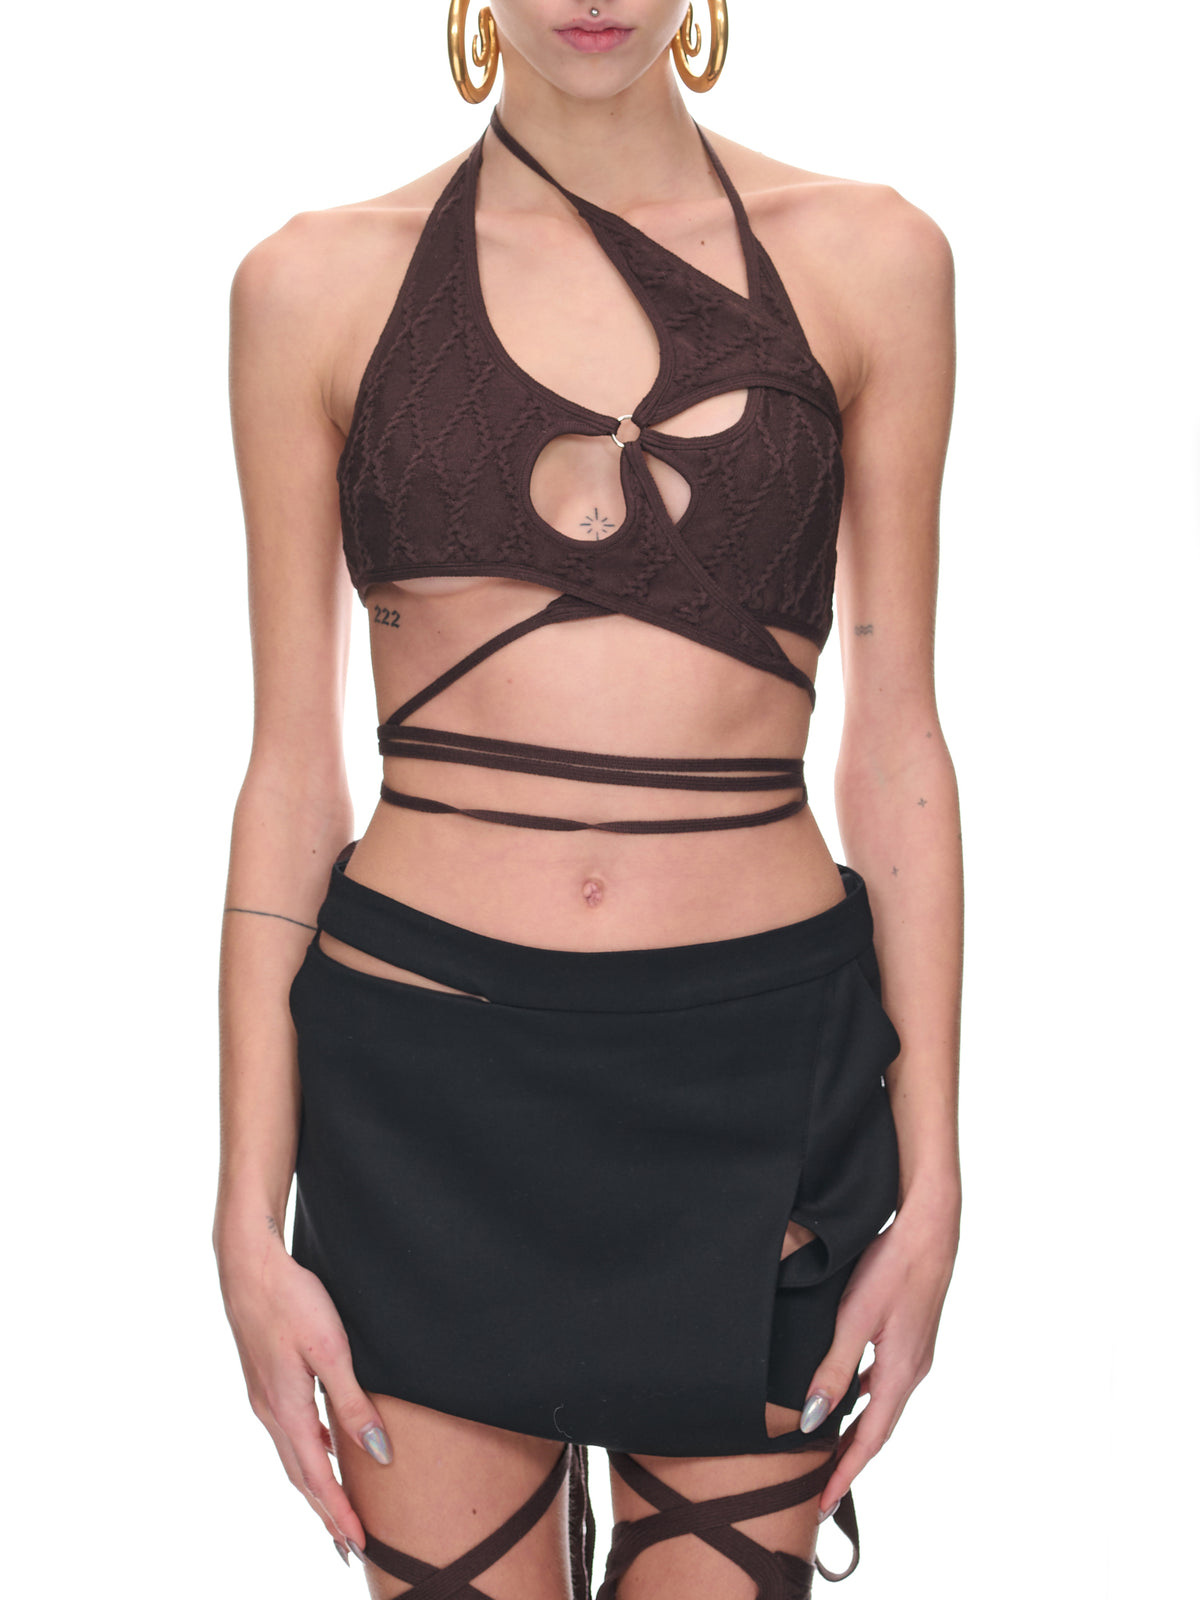 Deconstructed Cable-Knit Bra (K013-BROWN)